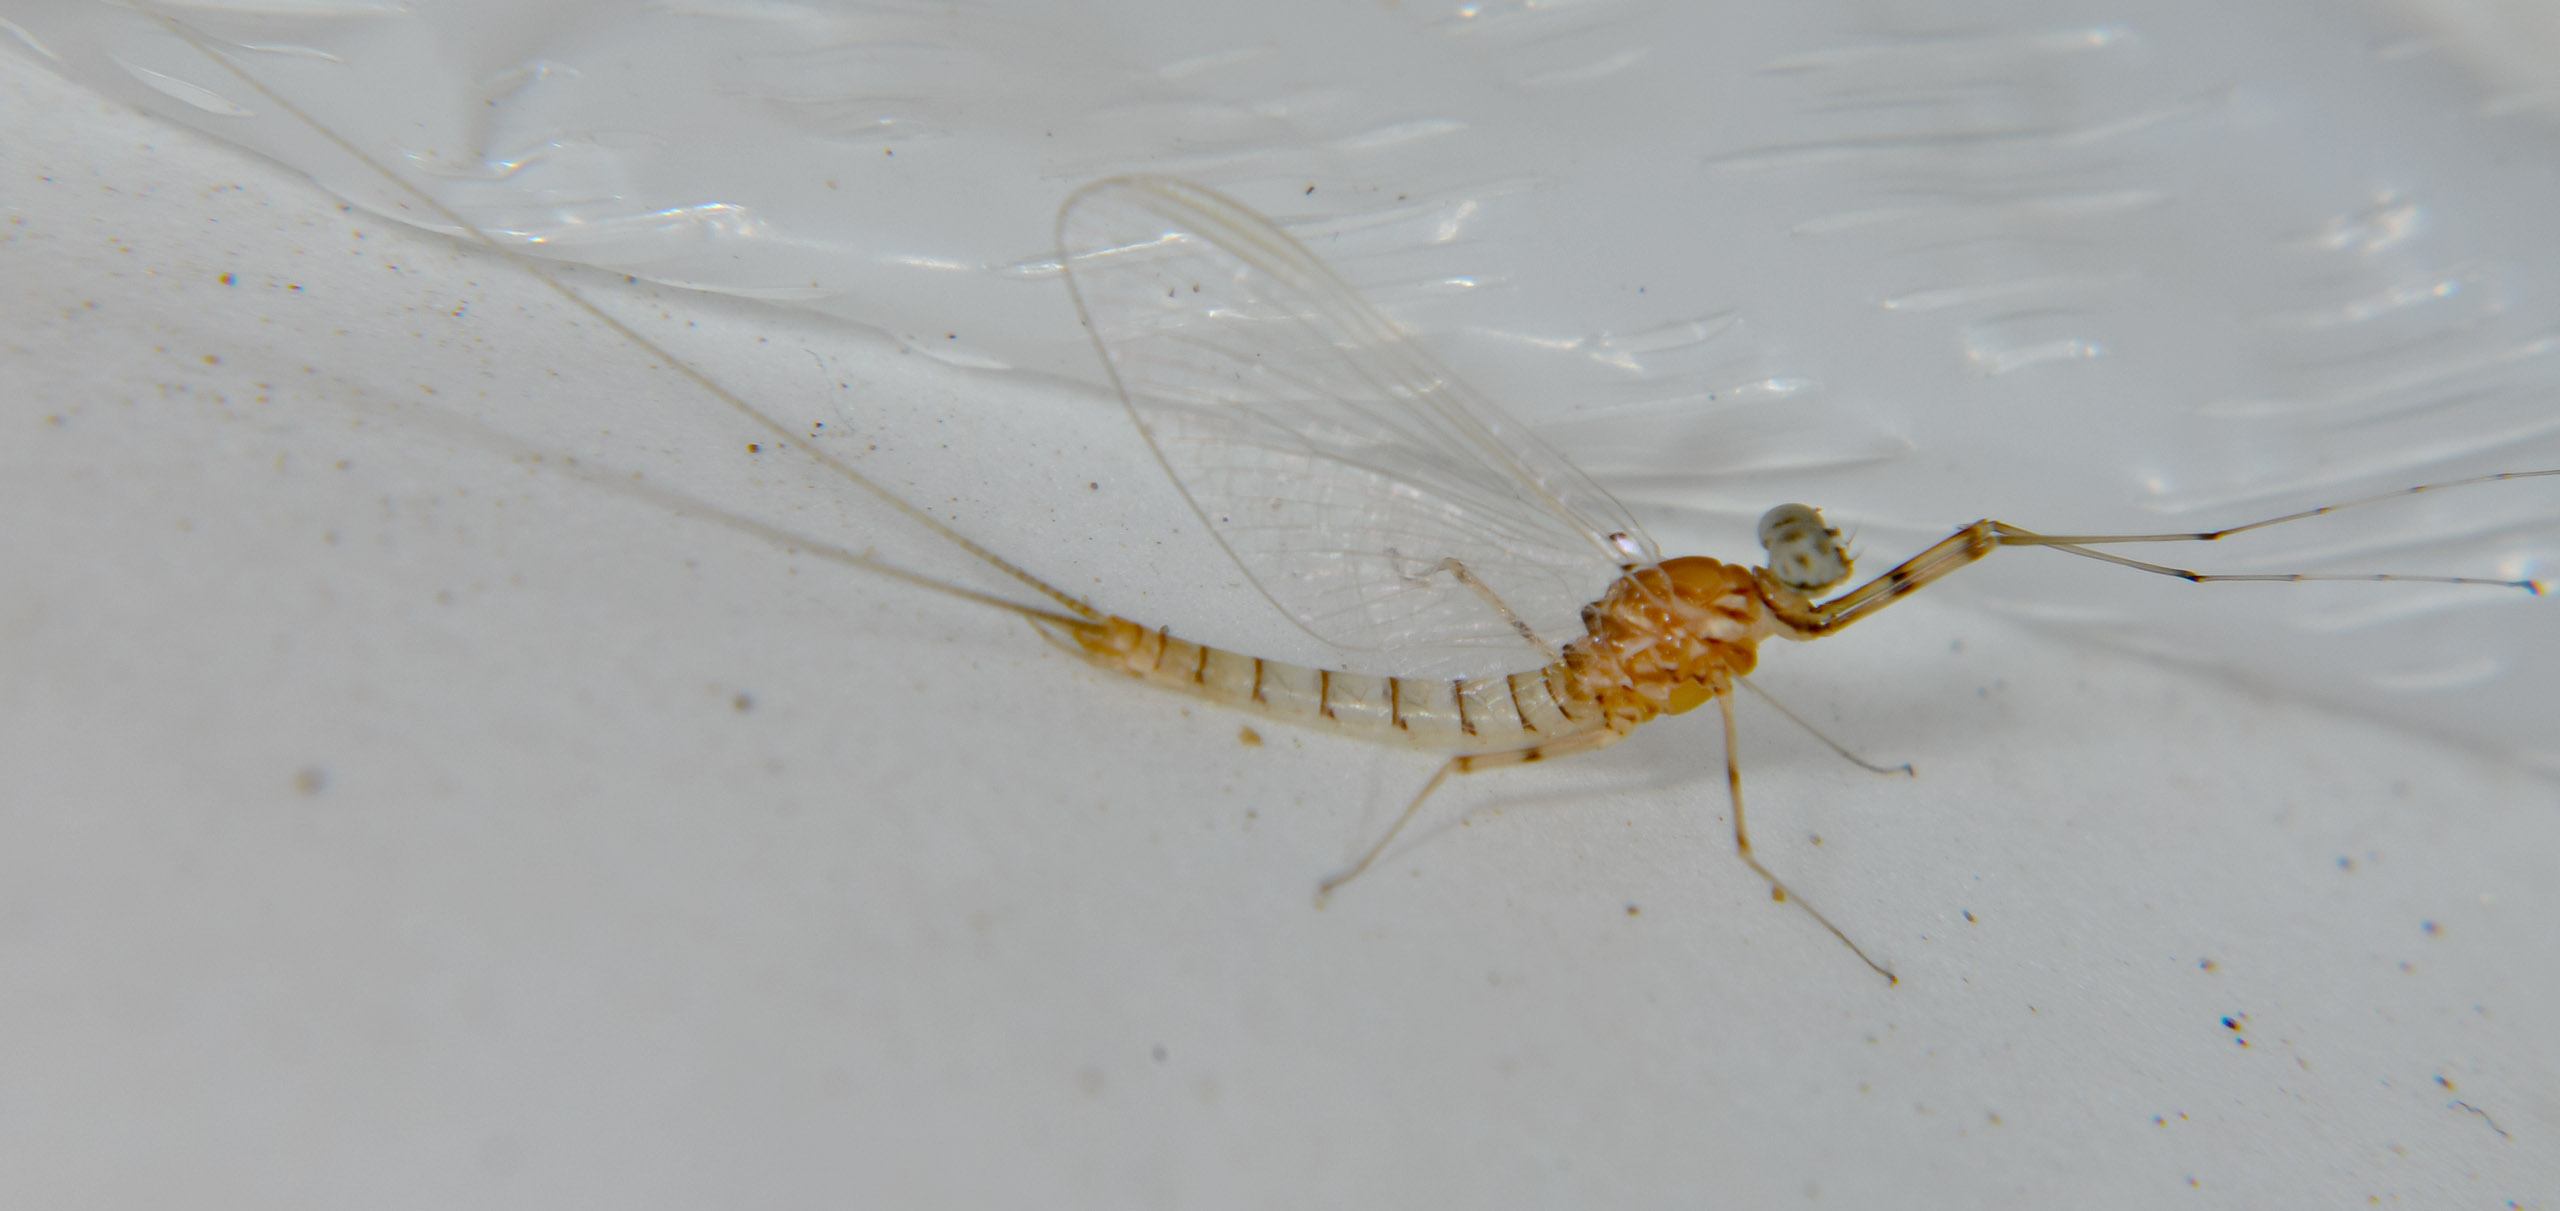 Male Epeorus albertae (Pink Lady) Mayfly Spinner from the Touchet River in Washington